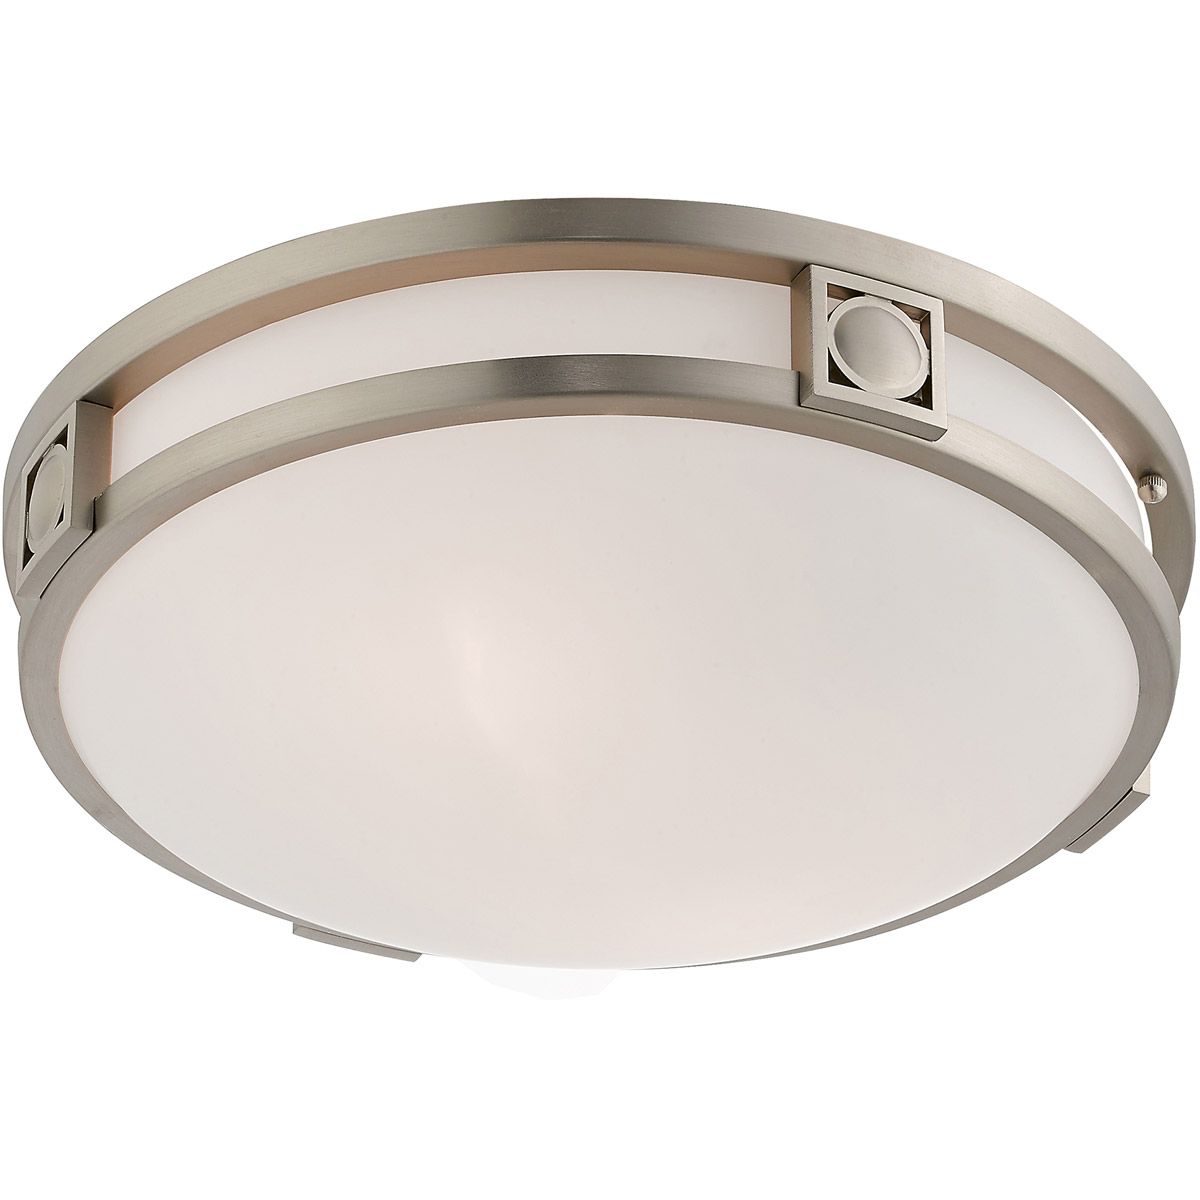 Livex 4487 91 Matrix 2 Light 13 Inch Brushed Nickel Ceiling Mount For Ceiling Hung Polished Nickel Oval Mirrors (View 12 of 15)